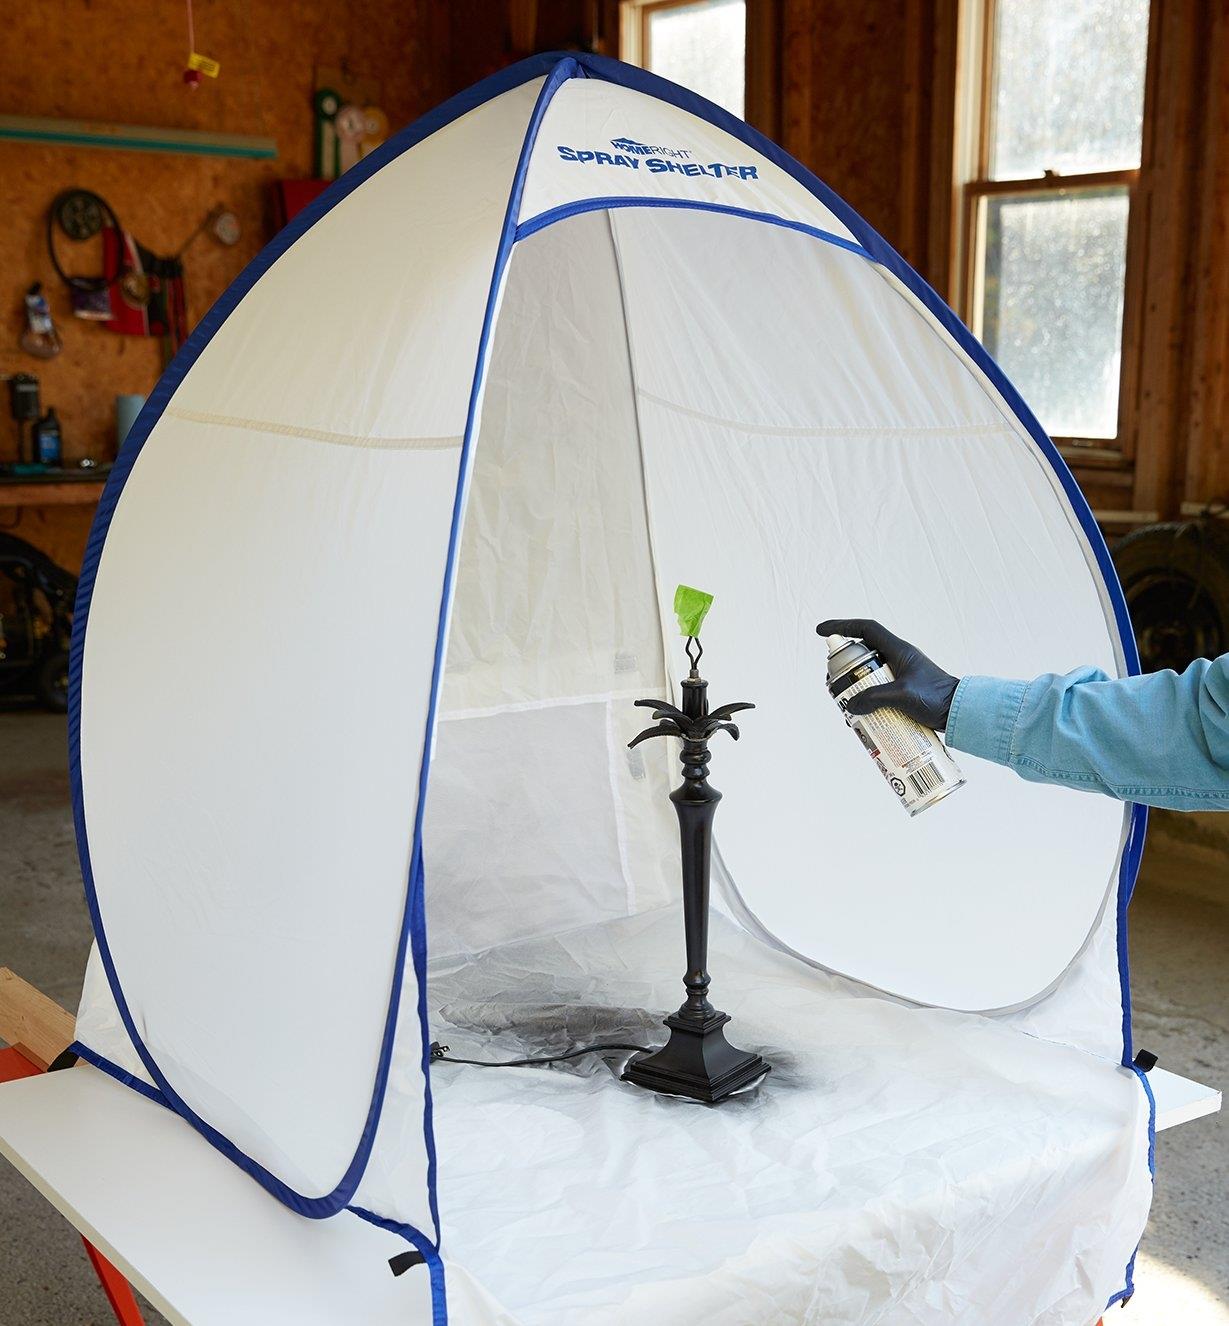 Spray painting a lamp stand inside a Small Portable Spray Shelter